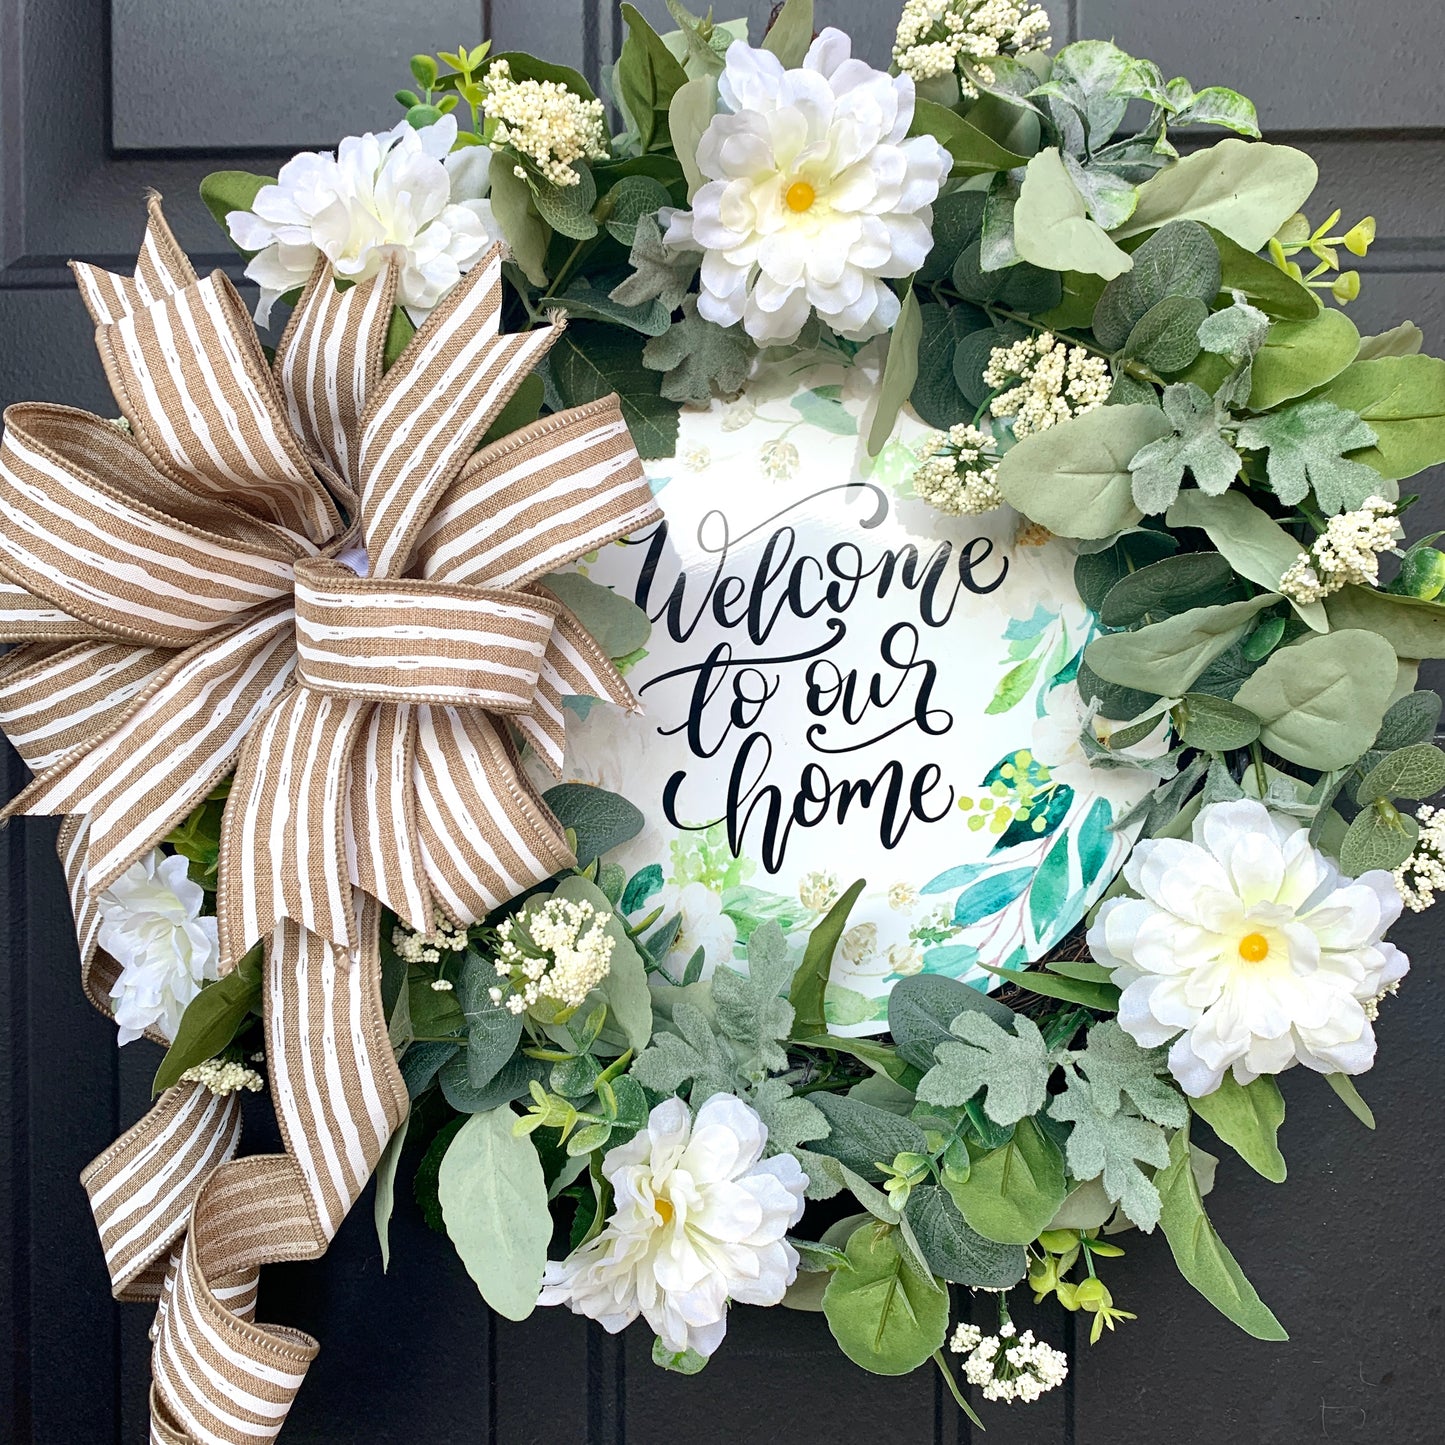 Welcome To Our Home Wreath, Elegant Wreath, Welcome to Our Home Door Hanger, Elegant Farmhouse Decor, Country Grapevine Wreath